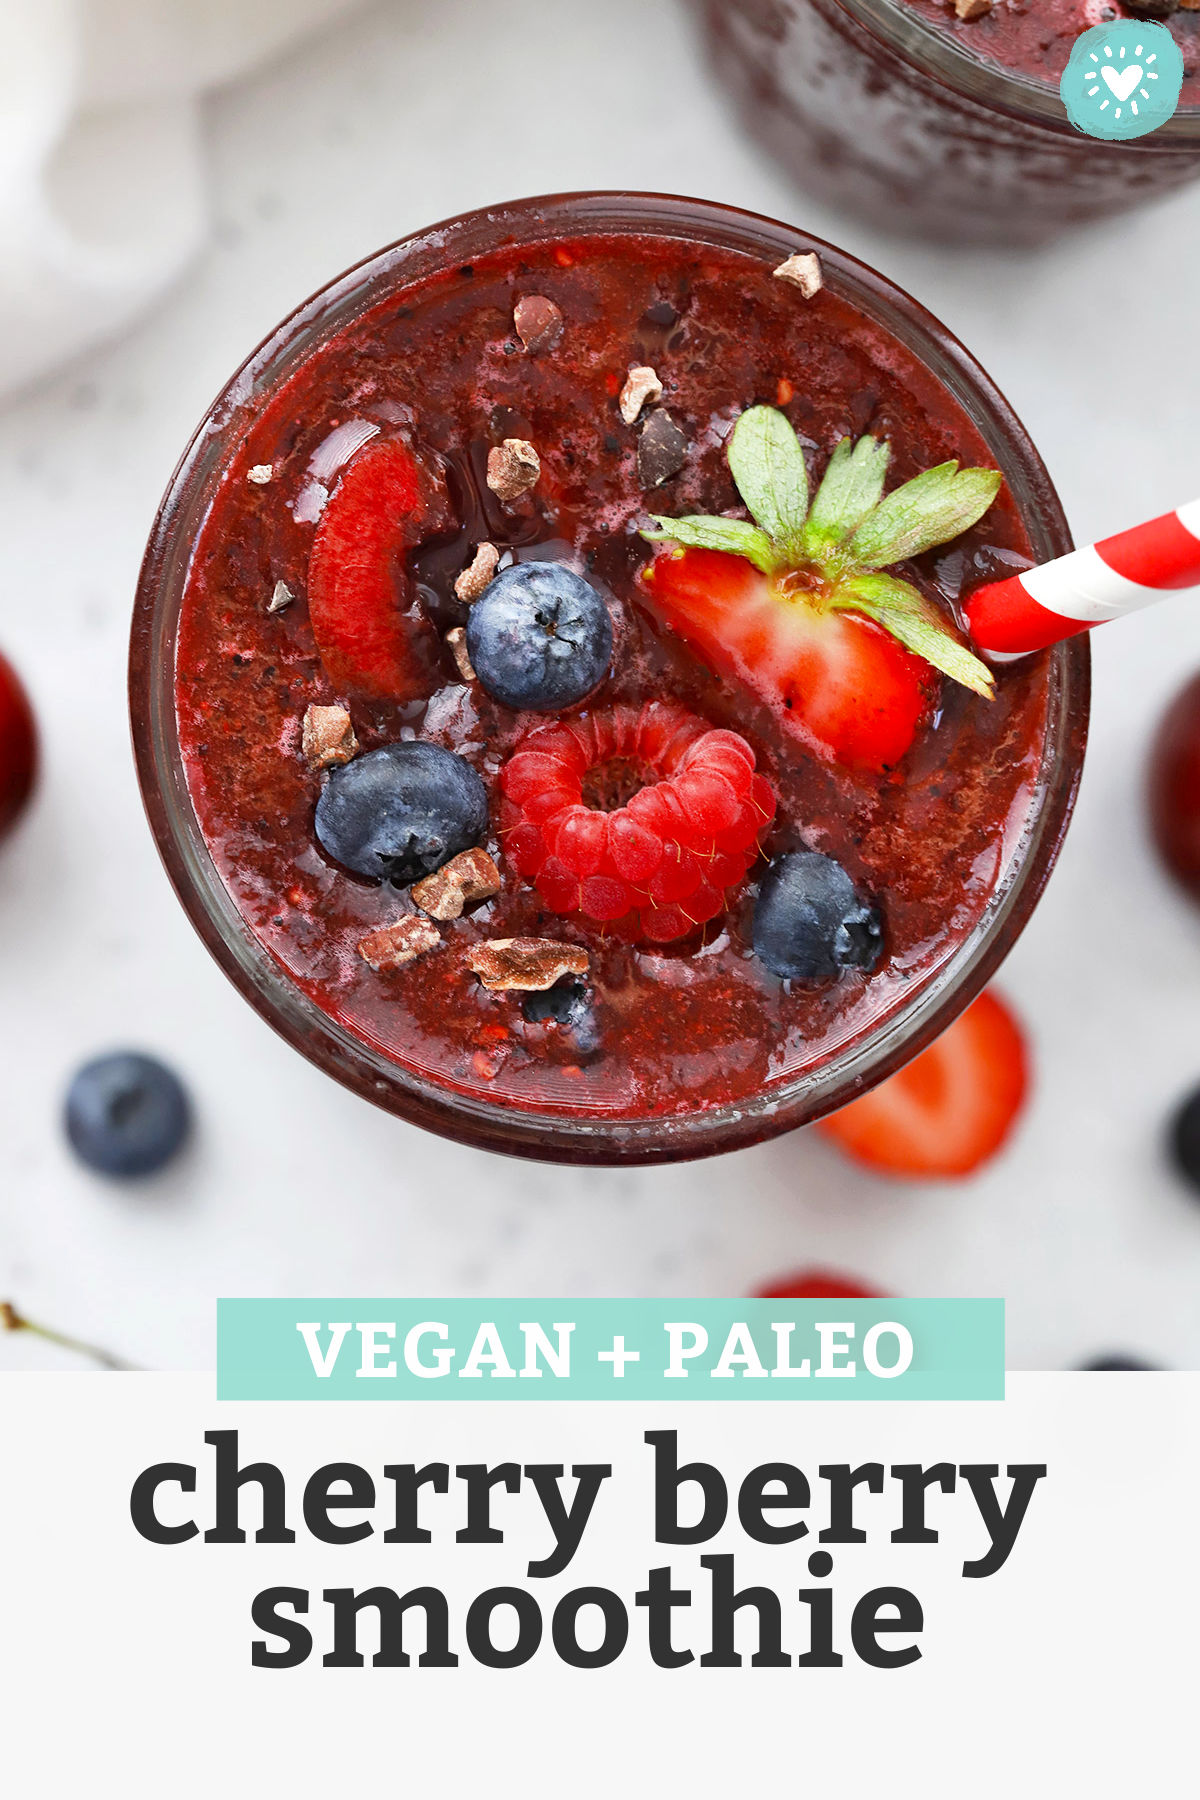 Close up view of a glass of vegan Cherry Berry Smoothie topped with fresh berries and cacao nibs with text overlay that reads "Vegan + Paleo Cherry Berry Smoothie"